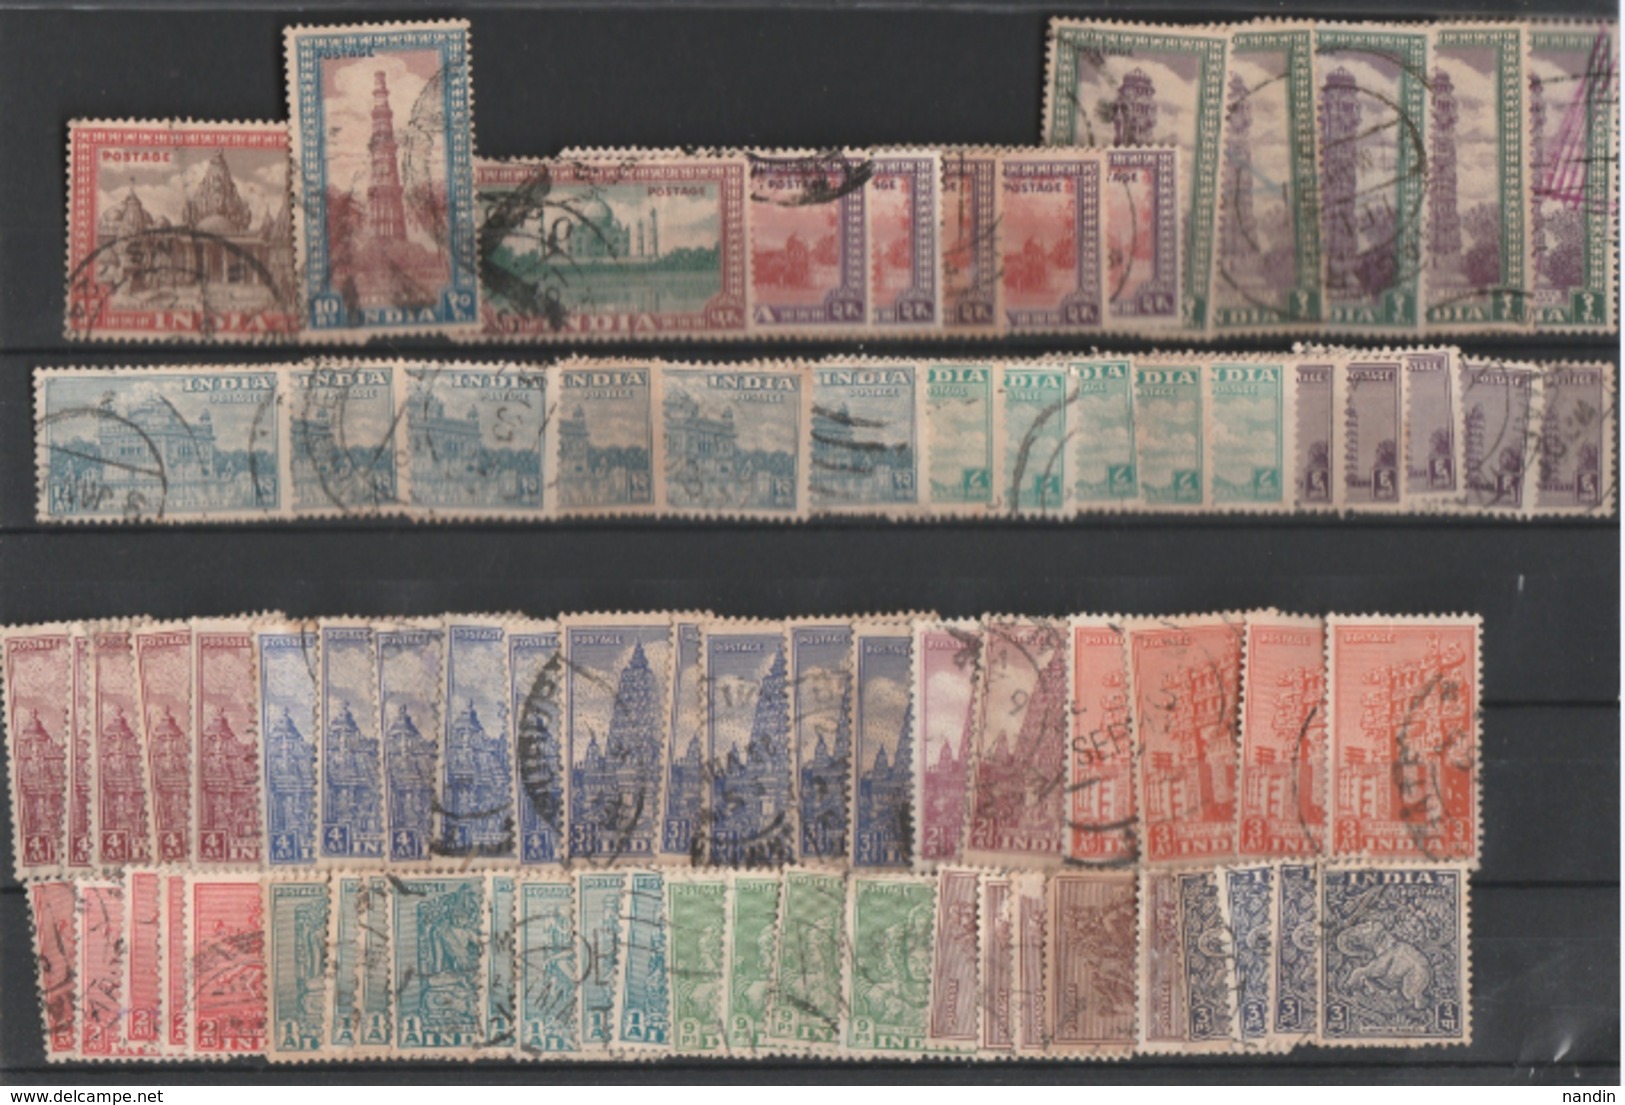 1949 USED STAMPS LOT  FROM INDIA ISSUED ON 2ND ANNV OF INDEPENDENCE ON ARCHAEOLOGICAL & HISTORICAL MONUMENTS - Gebruikt